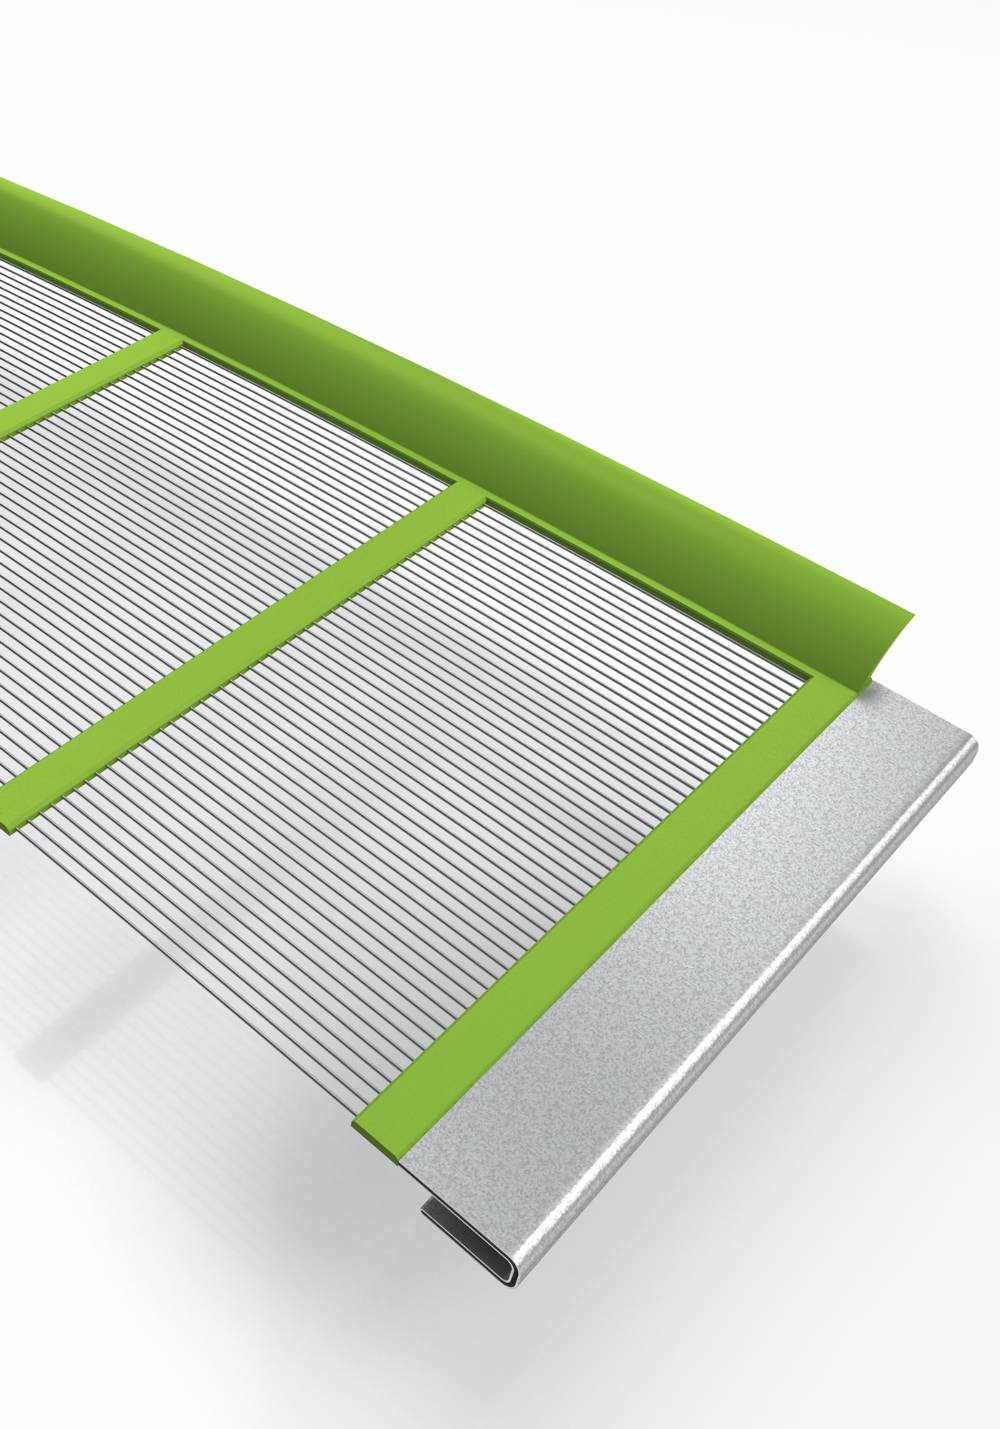 MAJOR FLEX-MAT with opening styles for a wide variety of material applications